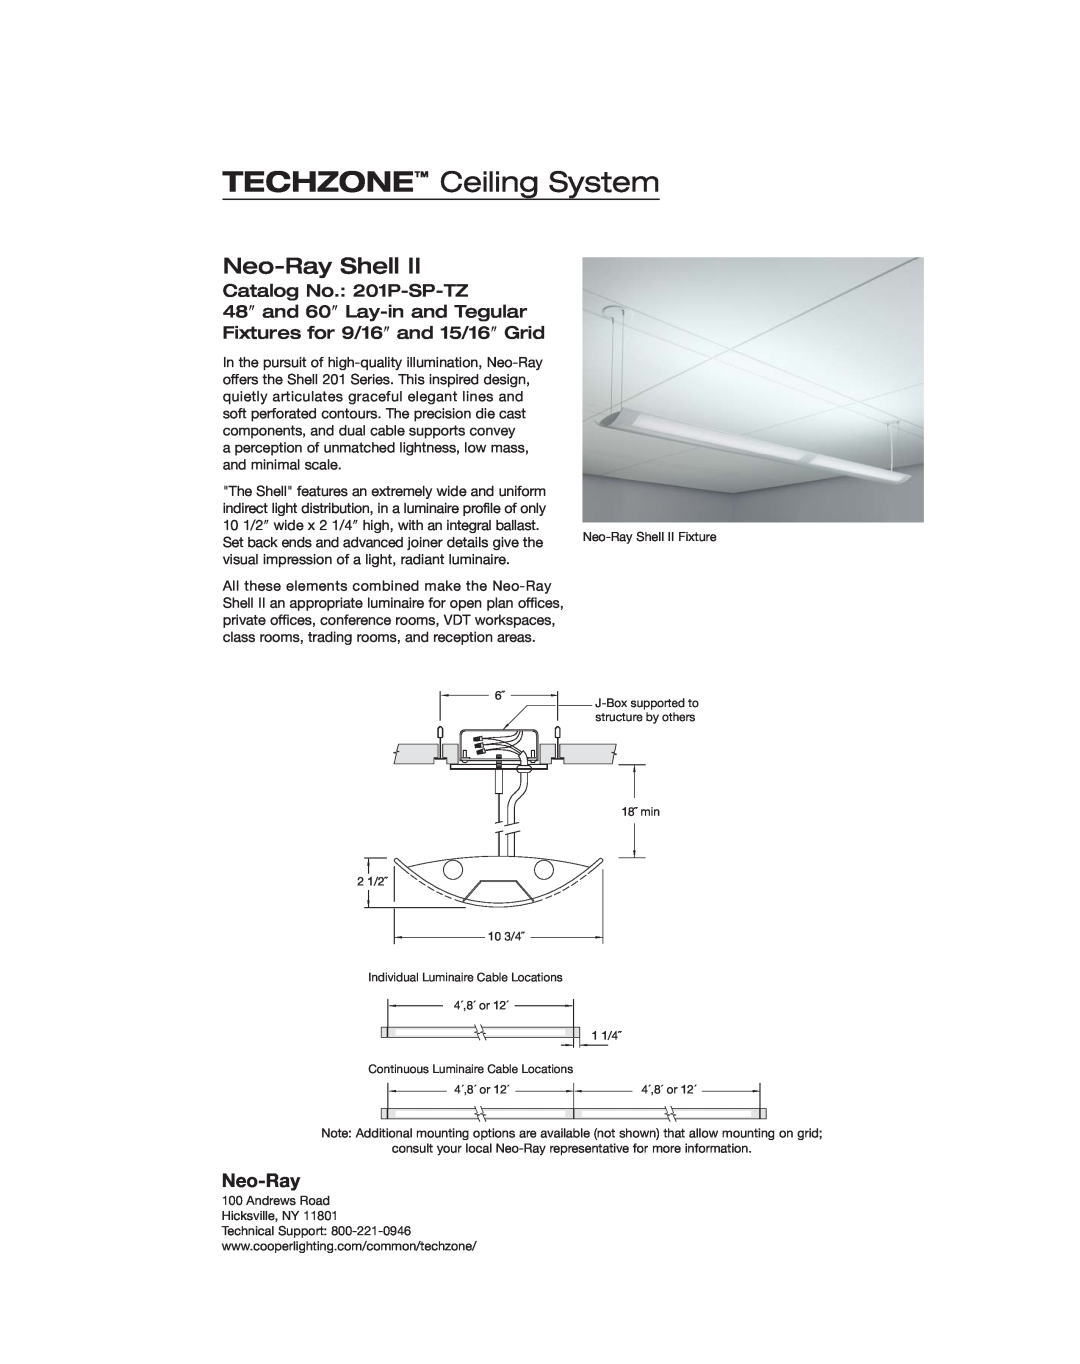 Armstrong World Industries 7A-648R, 7A-660R manual Neo-RayShell, Catalog No. 201P-SP-TZ, TECHZONE Ceiling System 